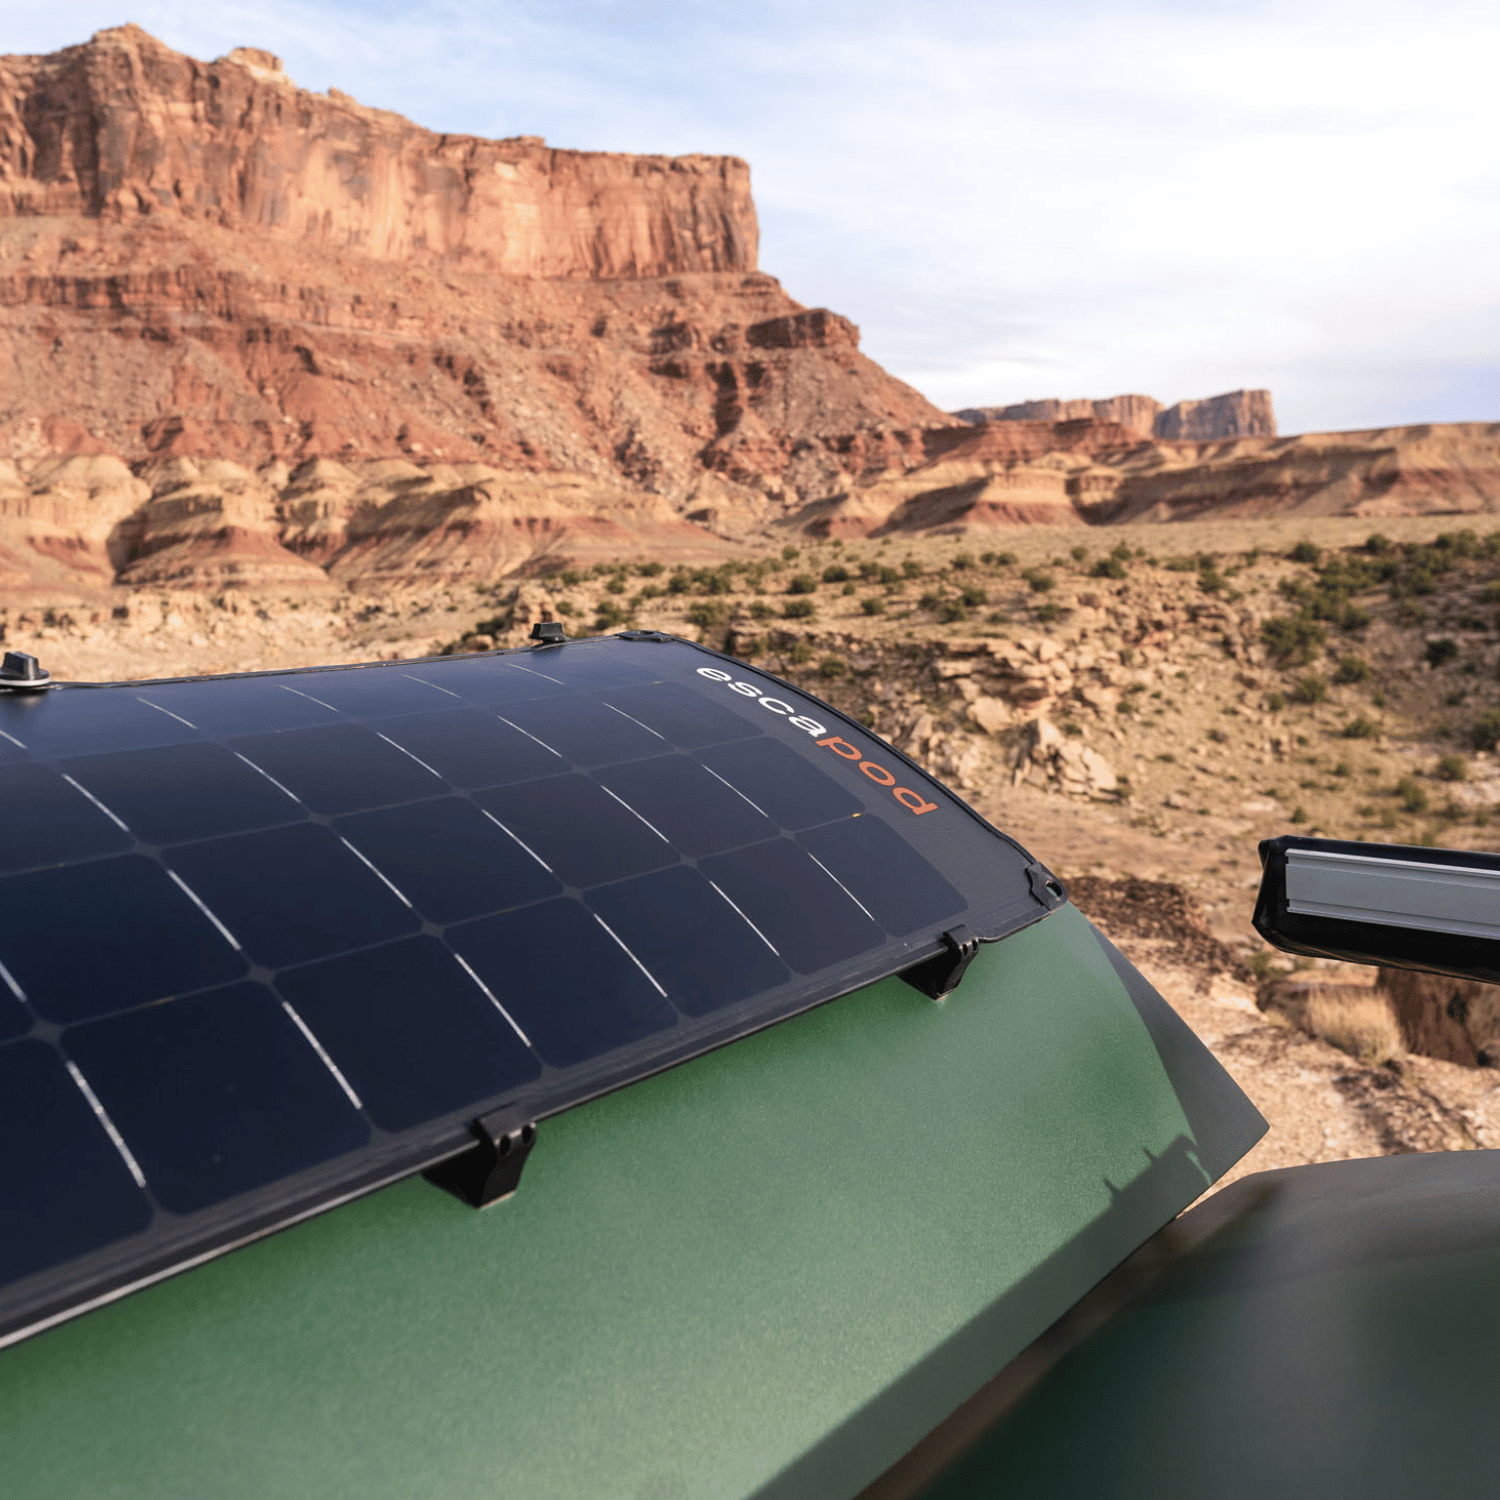 A solar panel on the back of a teardrop camper in full display, soaking up all the sun.